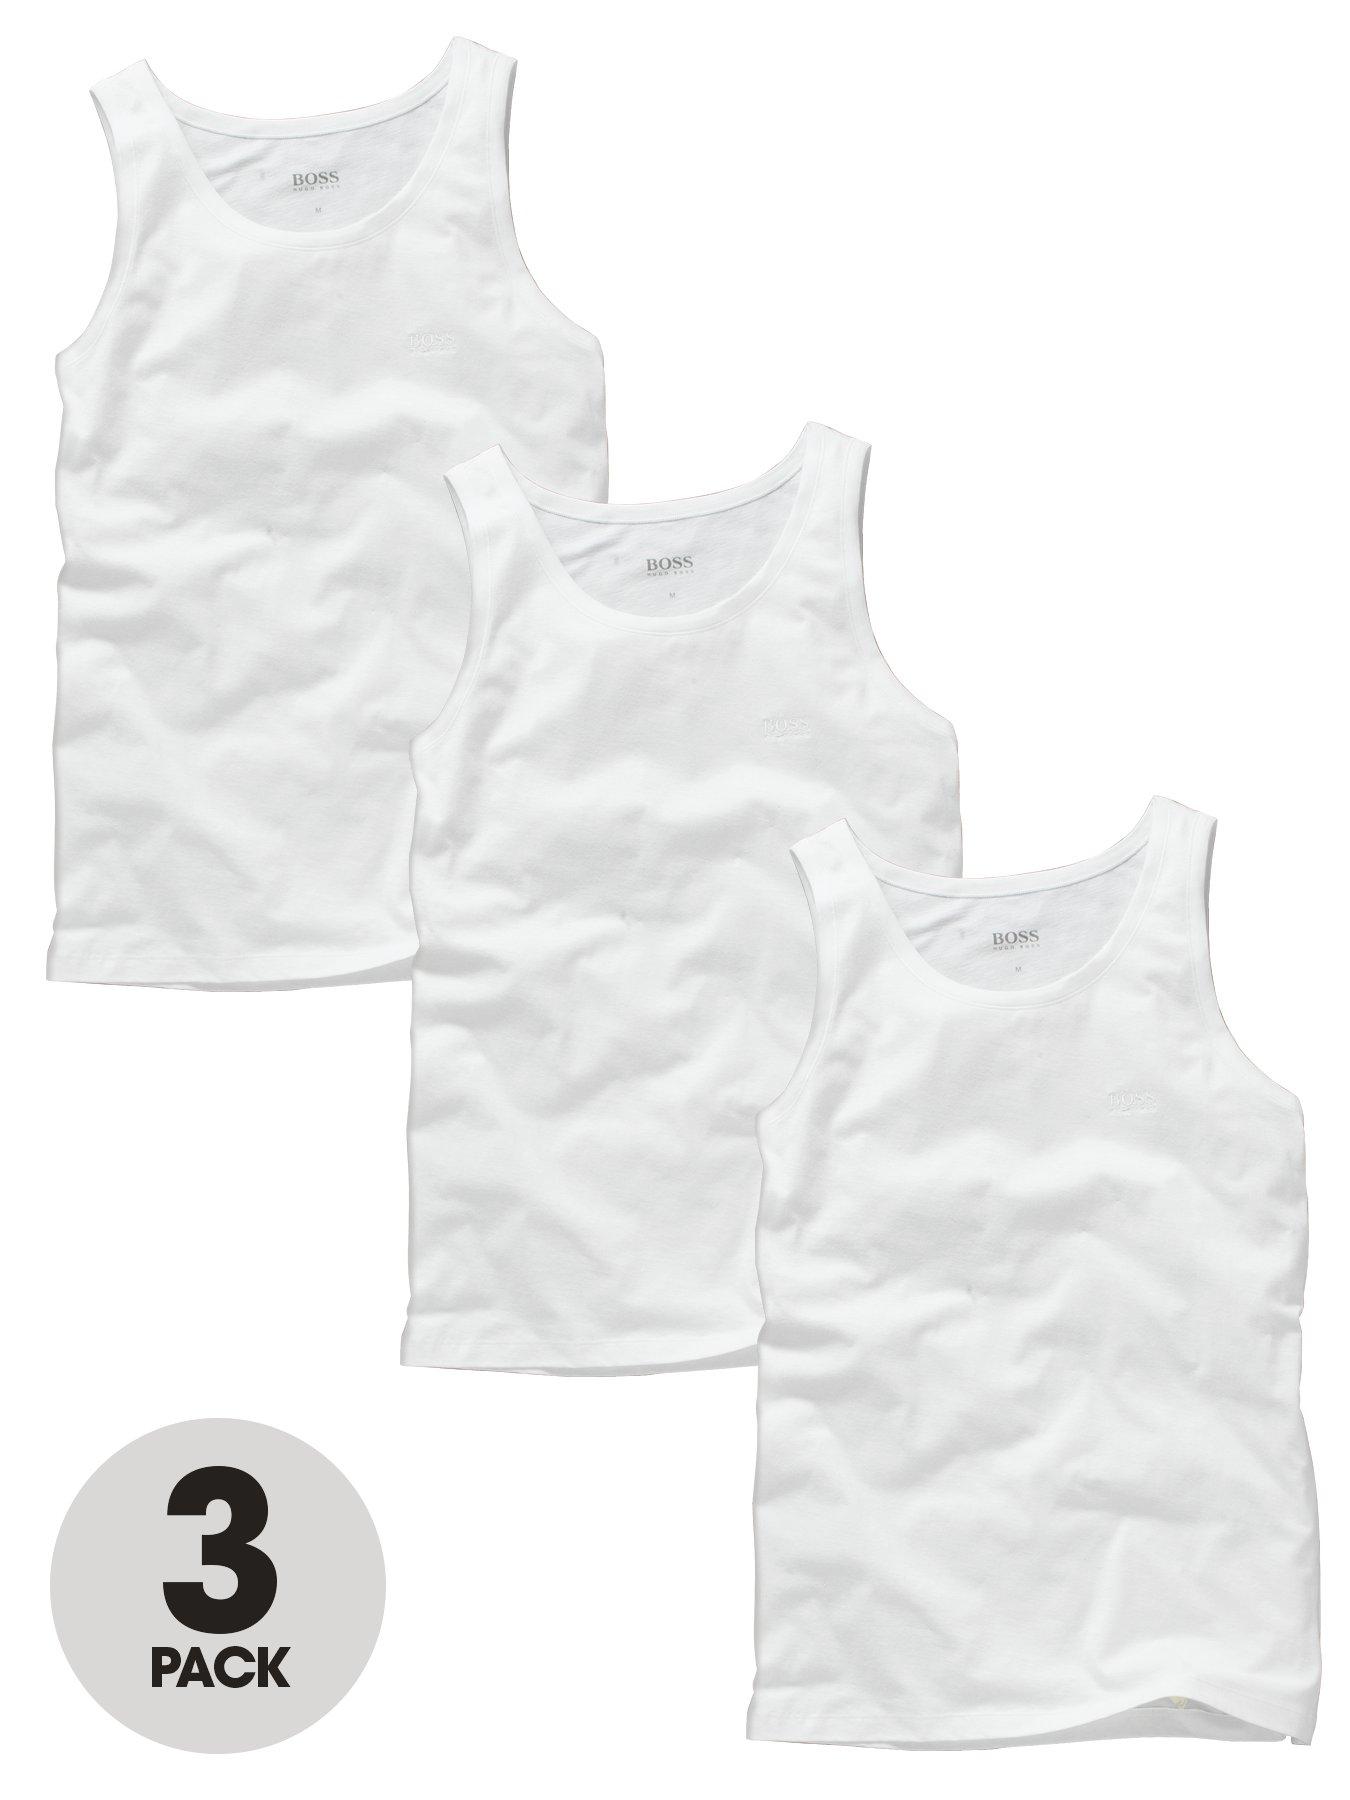 BOSS Core 3 Pack Vests - White | very.co.uk